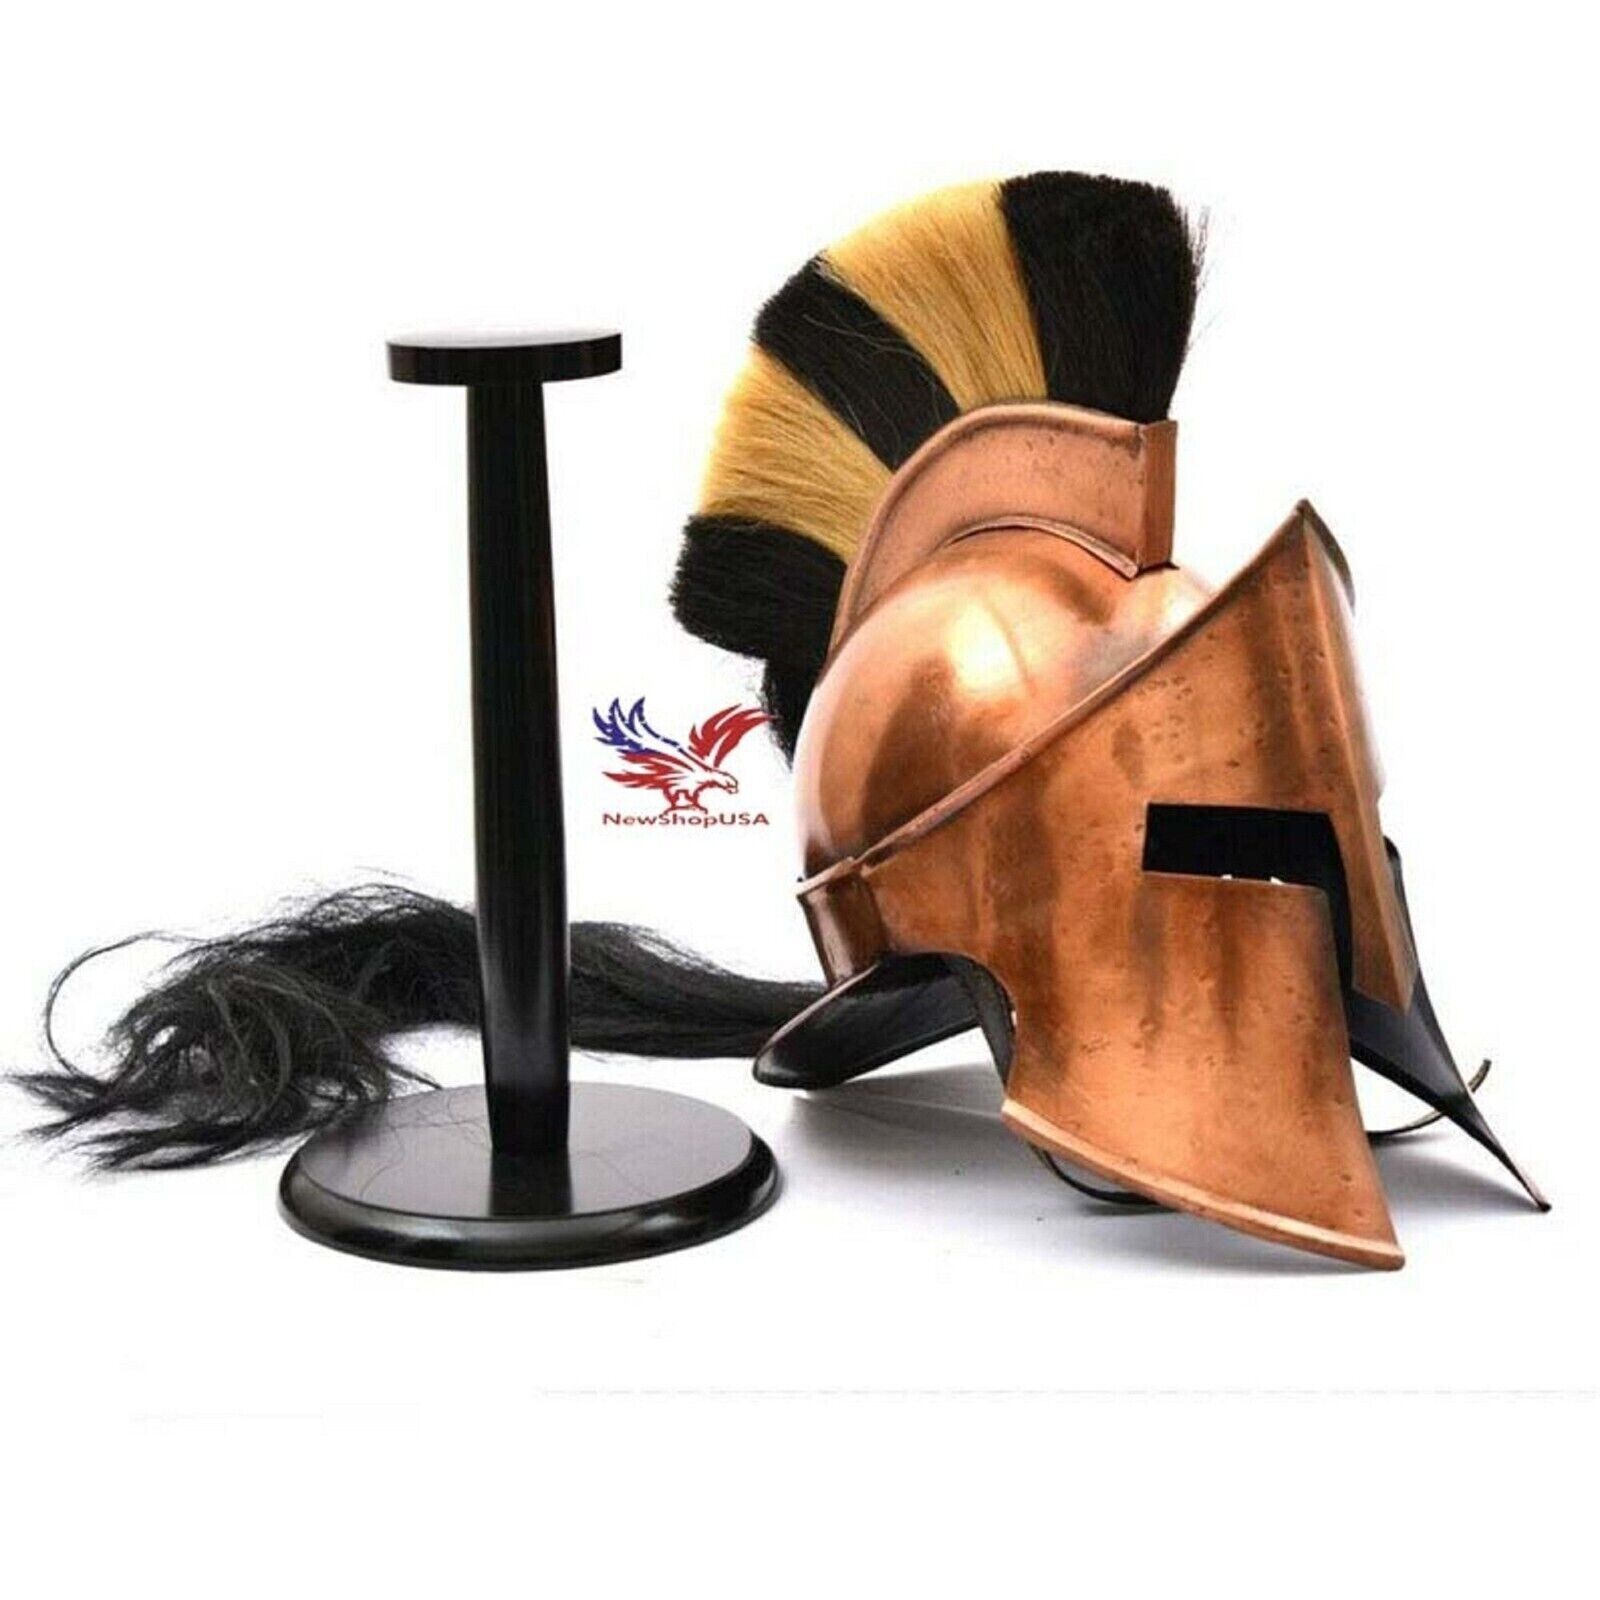 Medieval Armor Achilles Troy Helmet with Black Plume Steel One Size Rustic GIFT